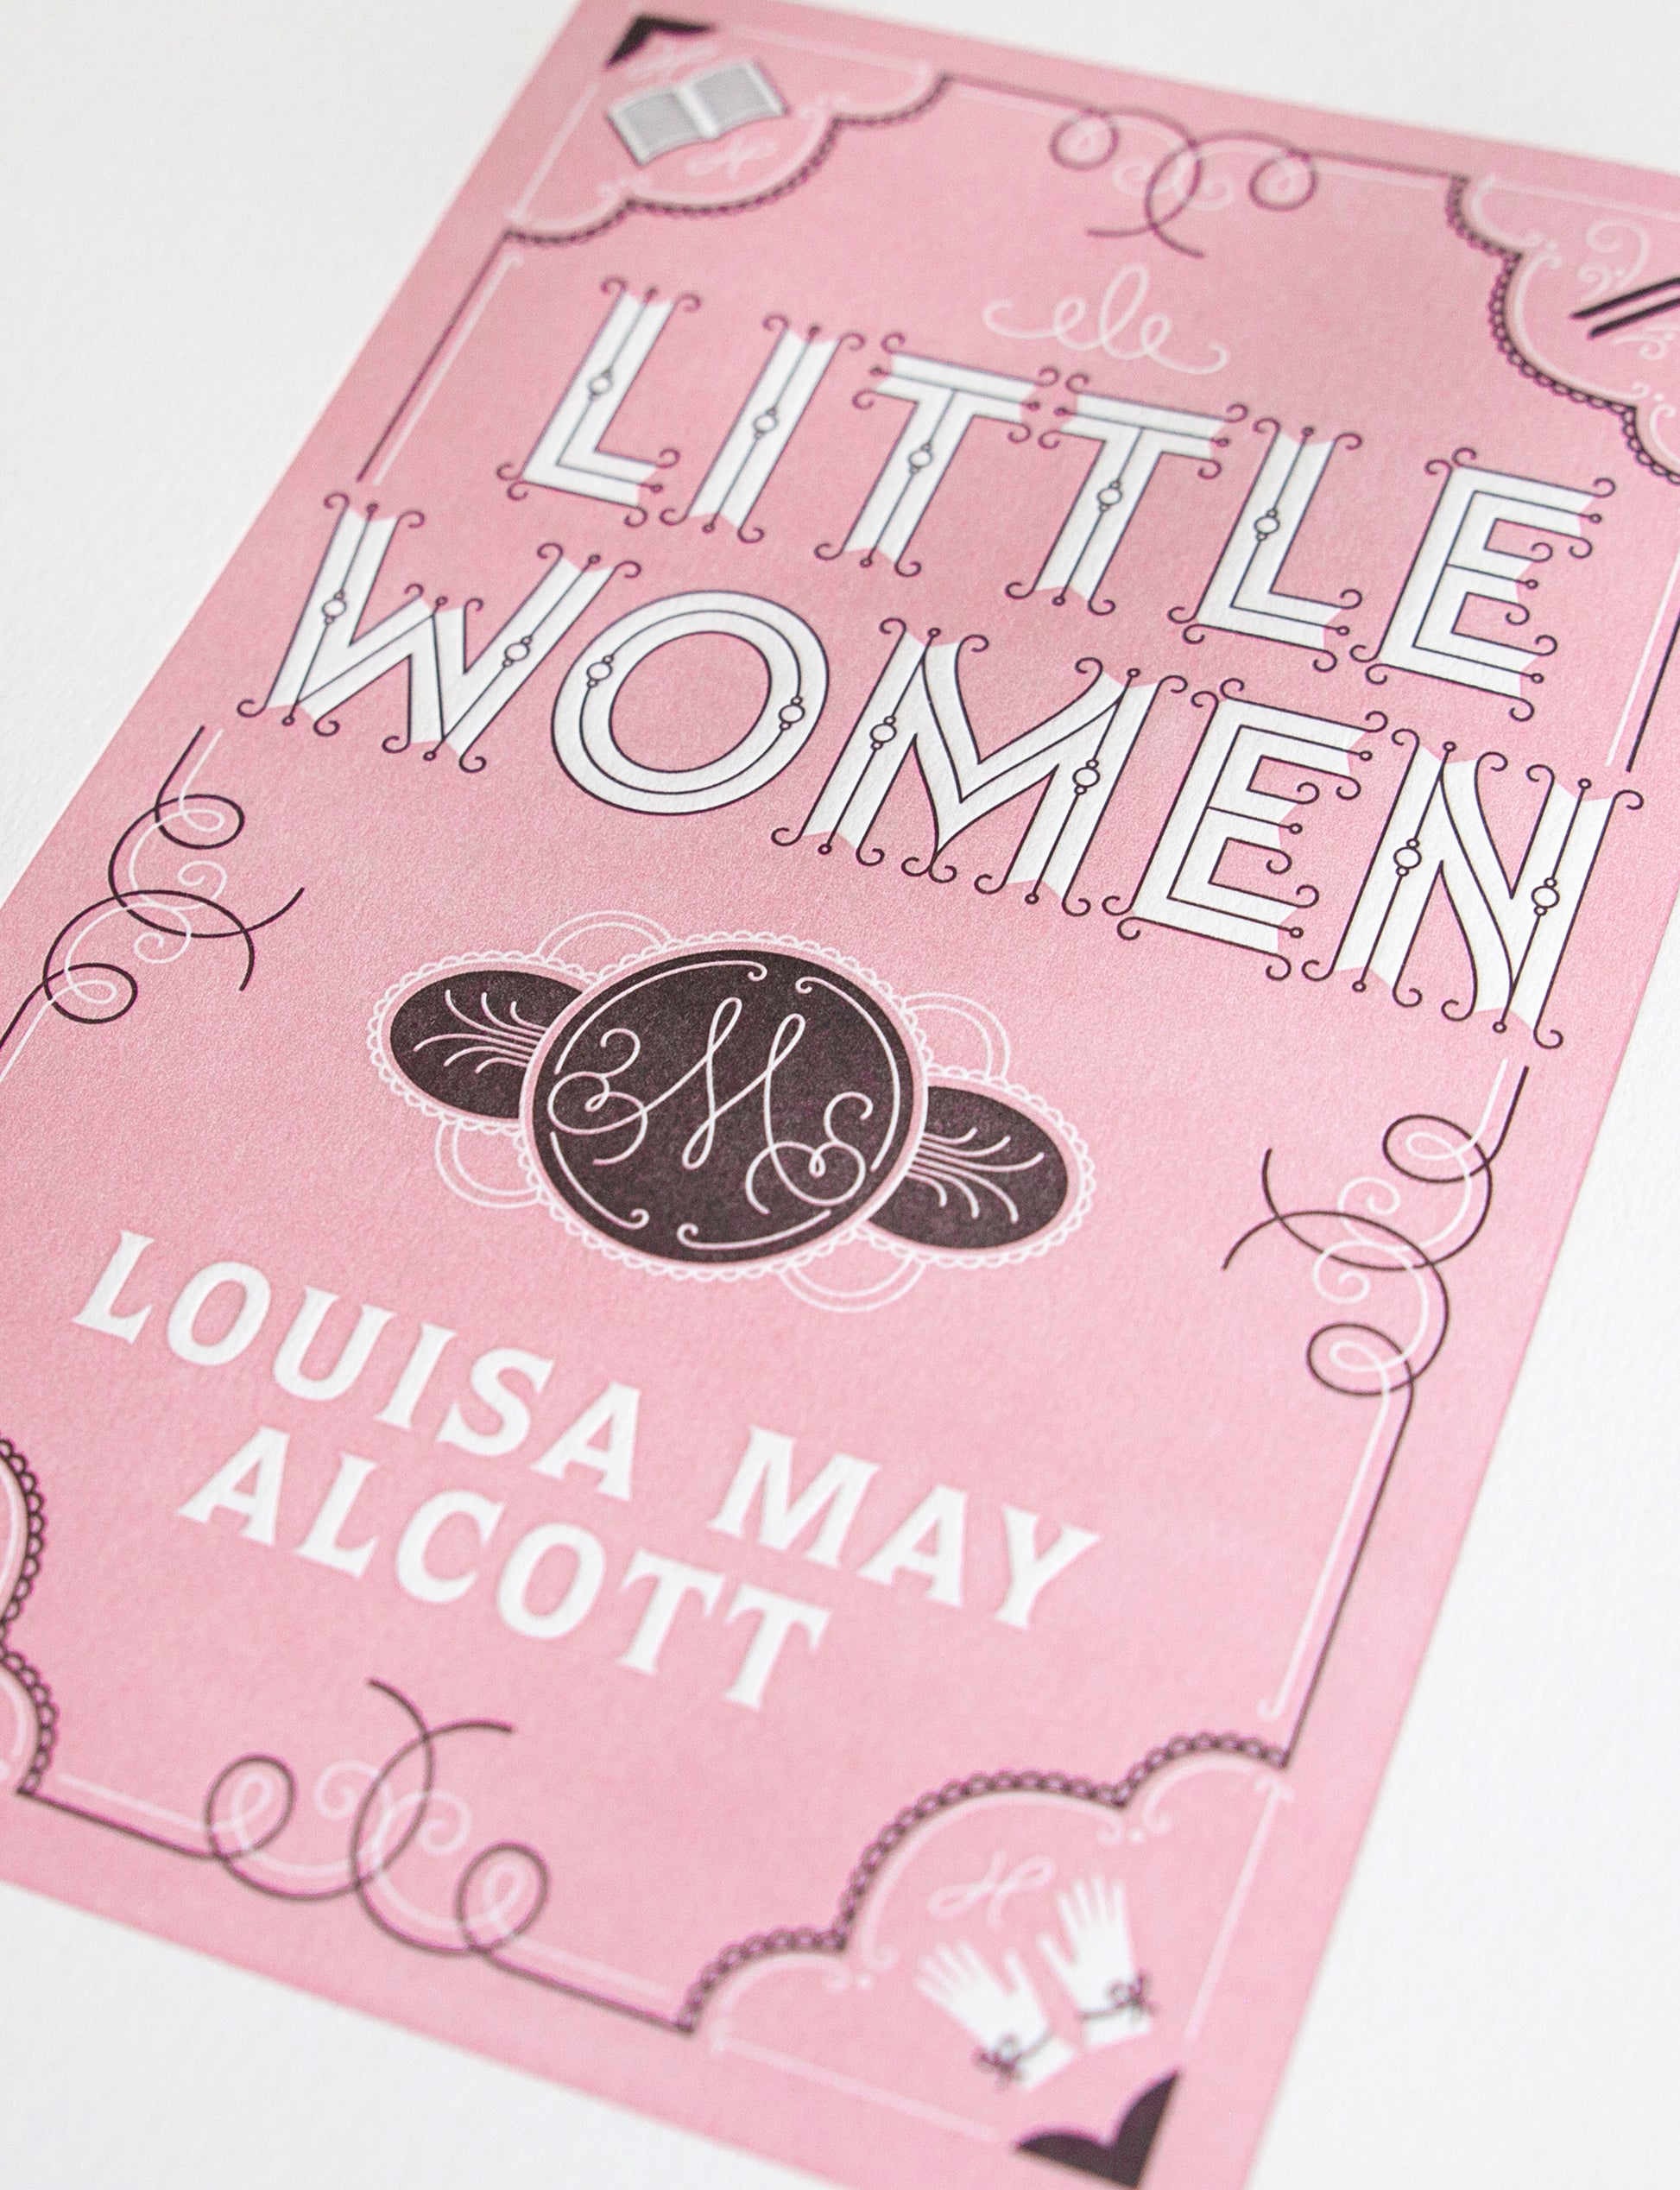 Close-up of a 2-color letterpress print in pink and black. Printed artwork is an illustrated book cover of Little Women including custom hand lettering.